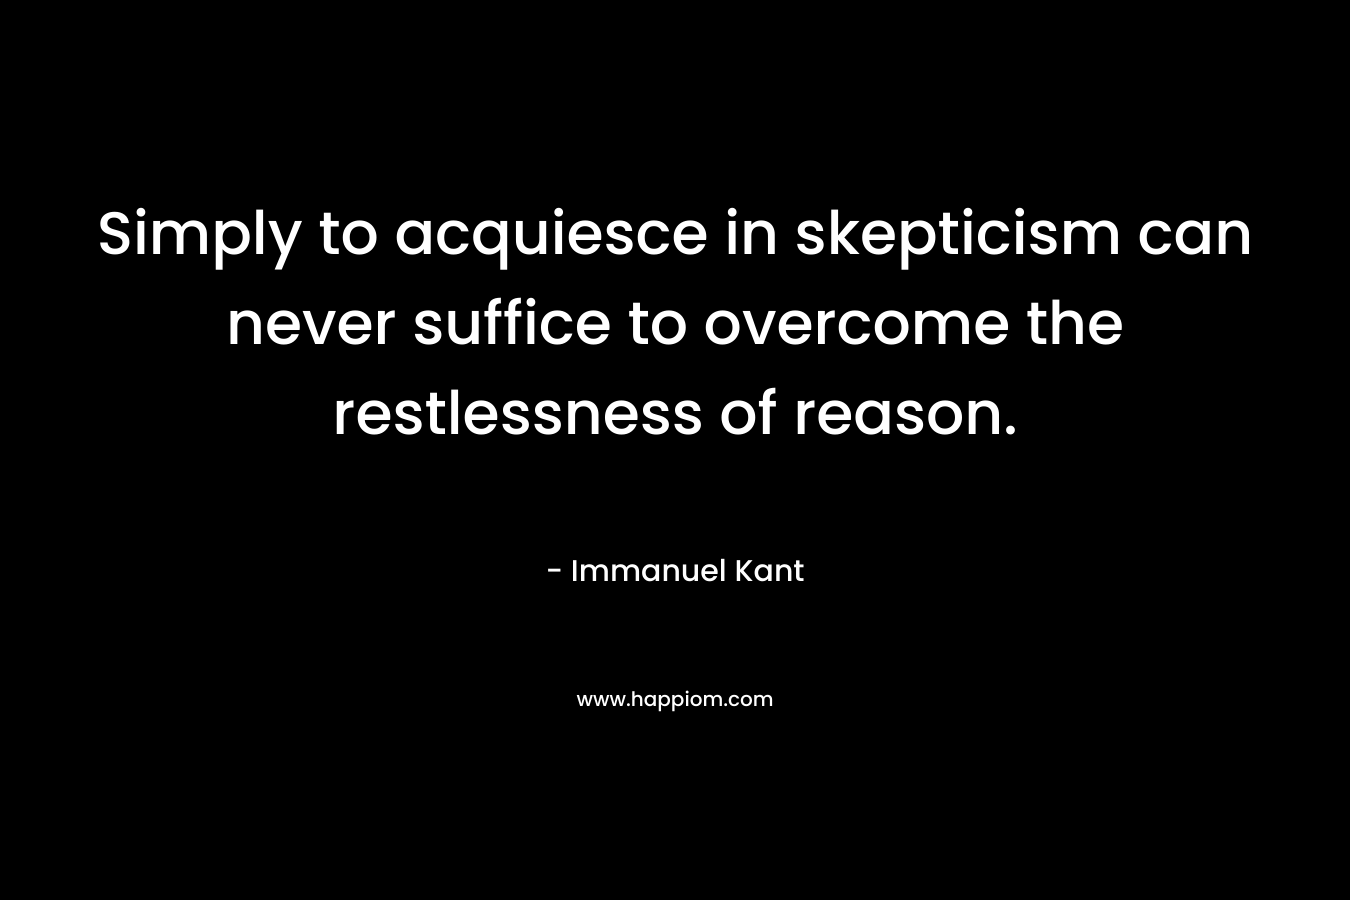 Simply to acquiesce in skepticism can never suffice to overcome the restlessness of reason. – Immanuel Kant